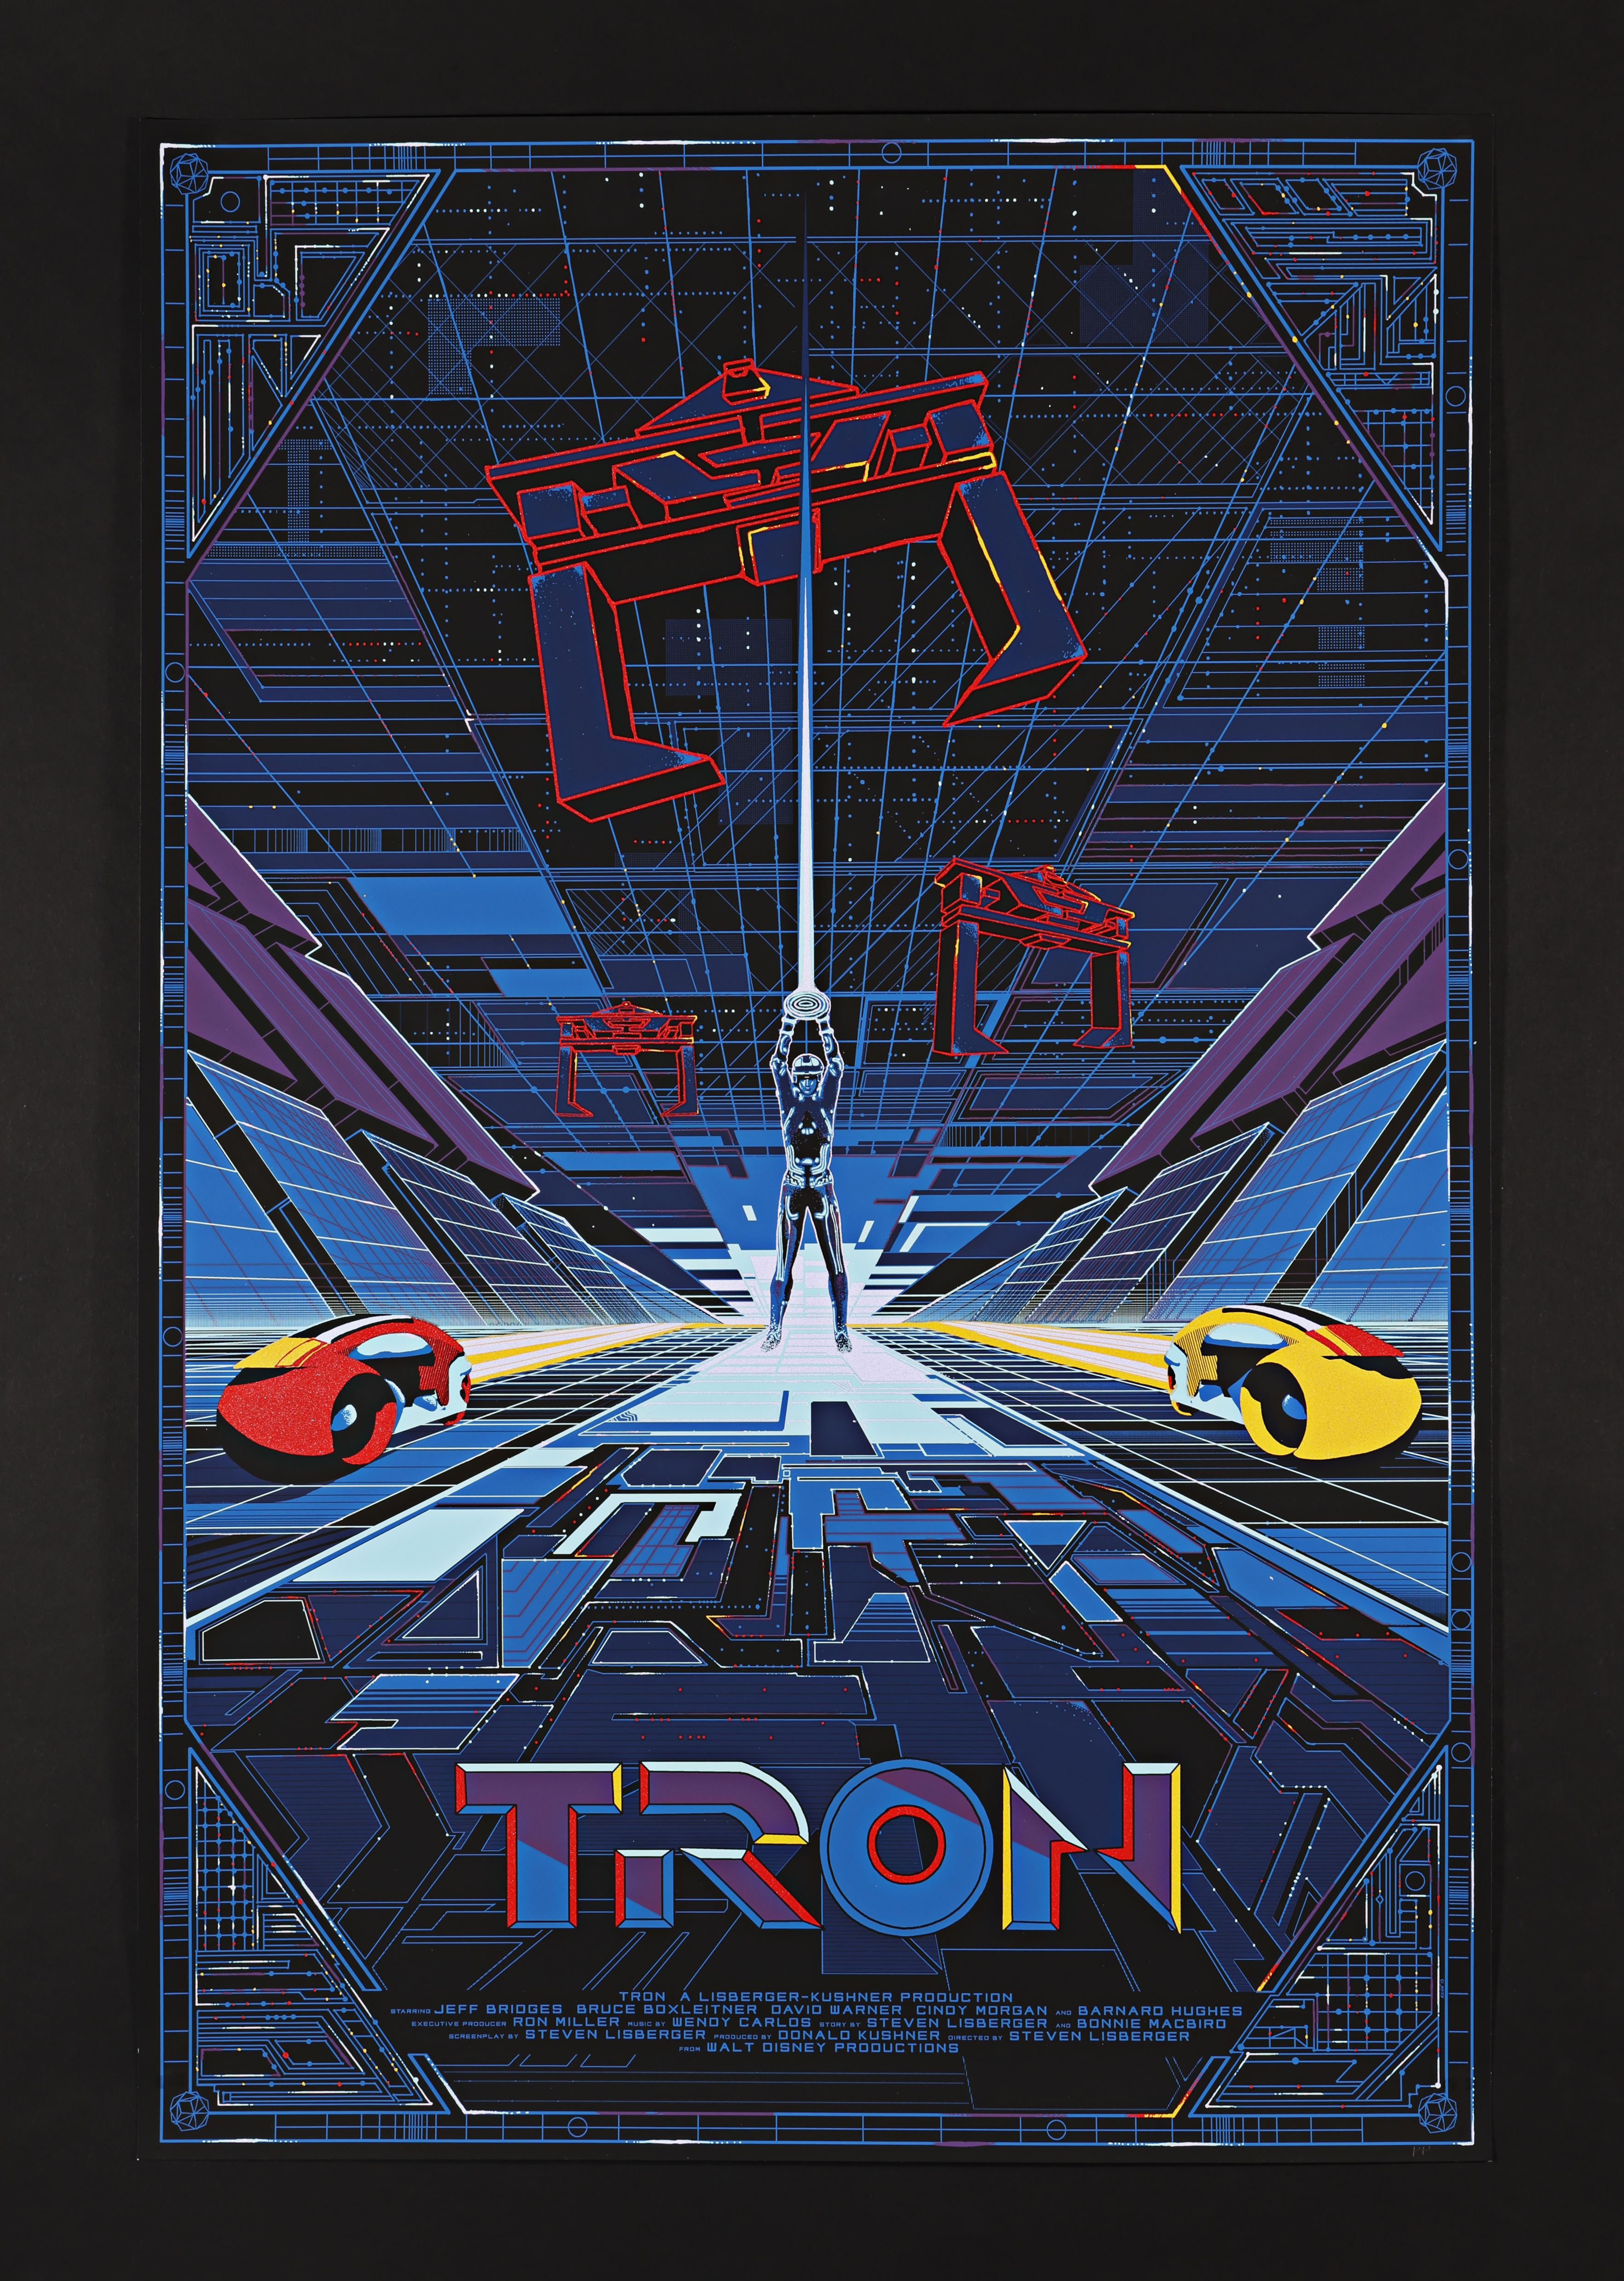 TRON (1982) - Hand-Annotated Limited Edition Printer's Proof Print by Kilian Eng, 2015